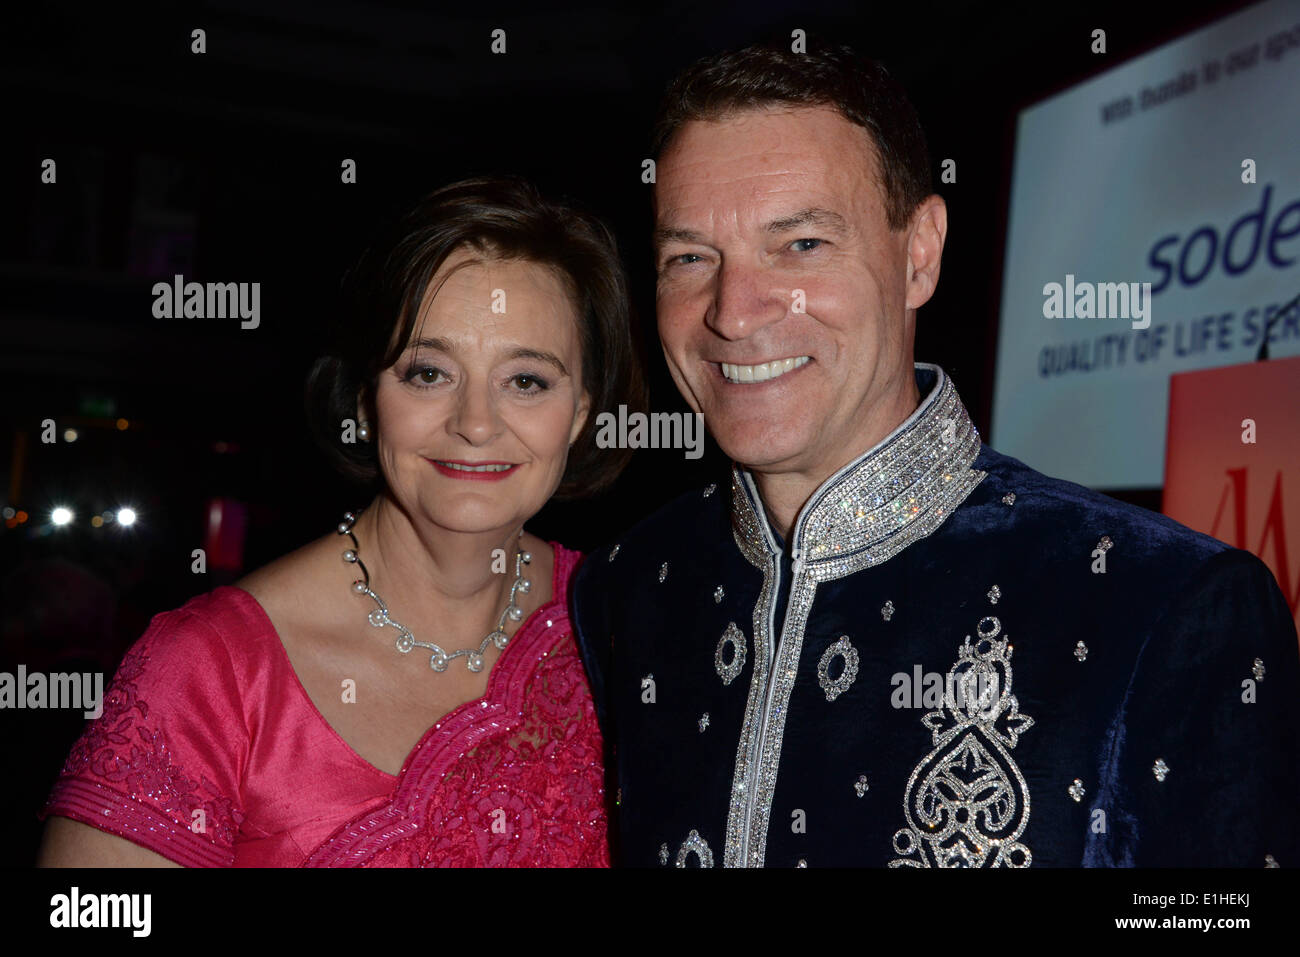 London, UK. 4th June 2014. Cherie Blair and Chris Sullivan attends the Asian Women of Achievement Awards at the London Hilton on Park Lane Hotel. Photo by See li Credit:  See Li/Alamy Live News Stock Photo